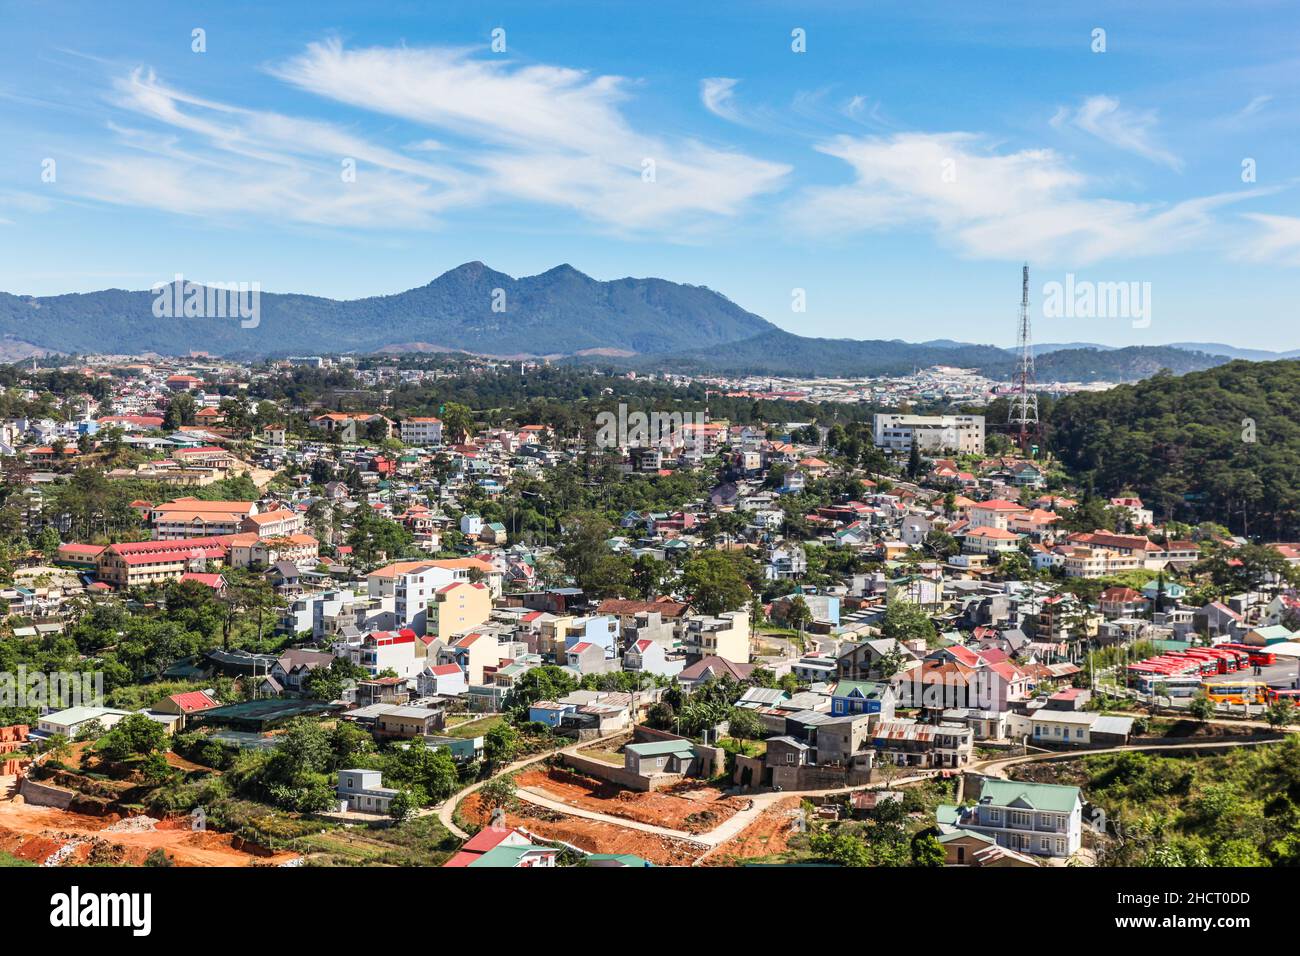 View of the city of Dalat in the Vietnamese highlands, this is an important centre in the agricultural area. Stock Photo